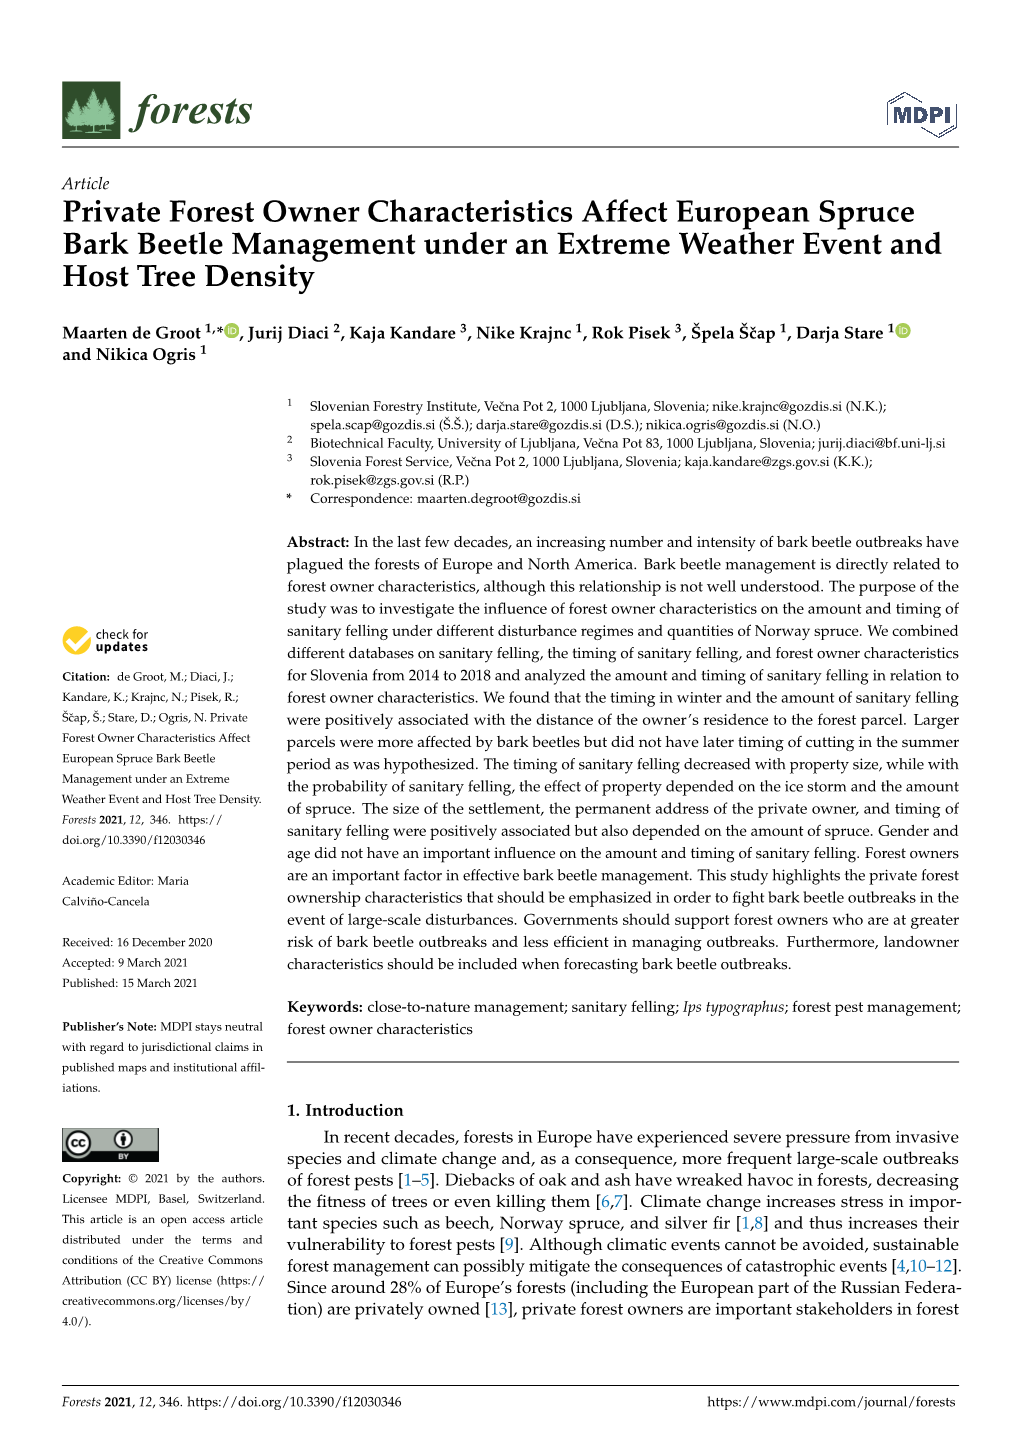 Private Forest Owner Characteristics Affect European Spruce Bark Beetle Management Under an Extreme Weather Event and Host Tree Density